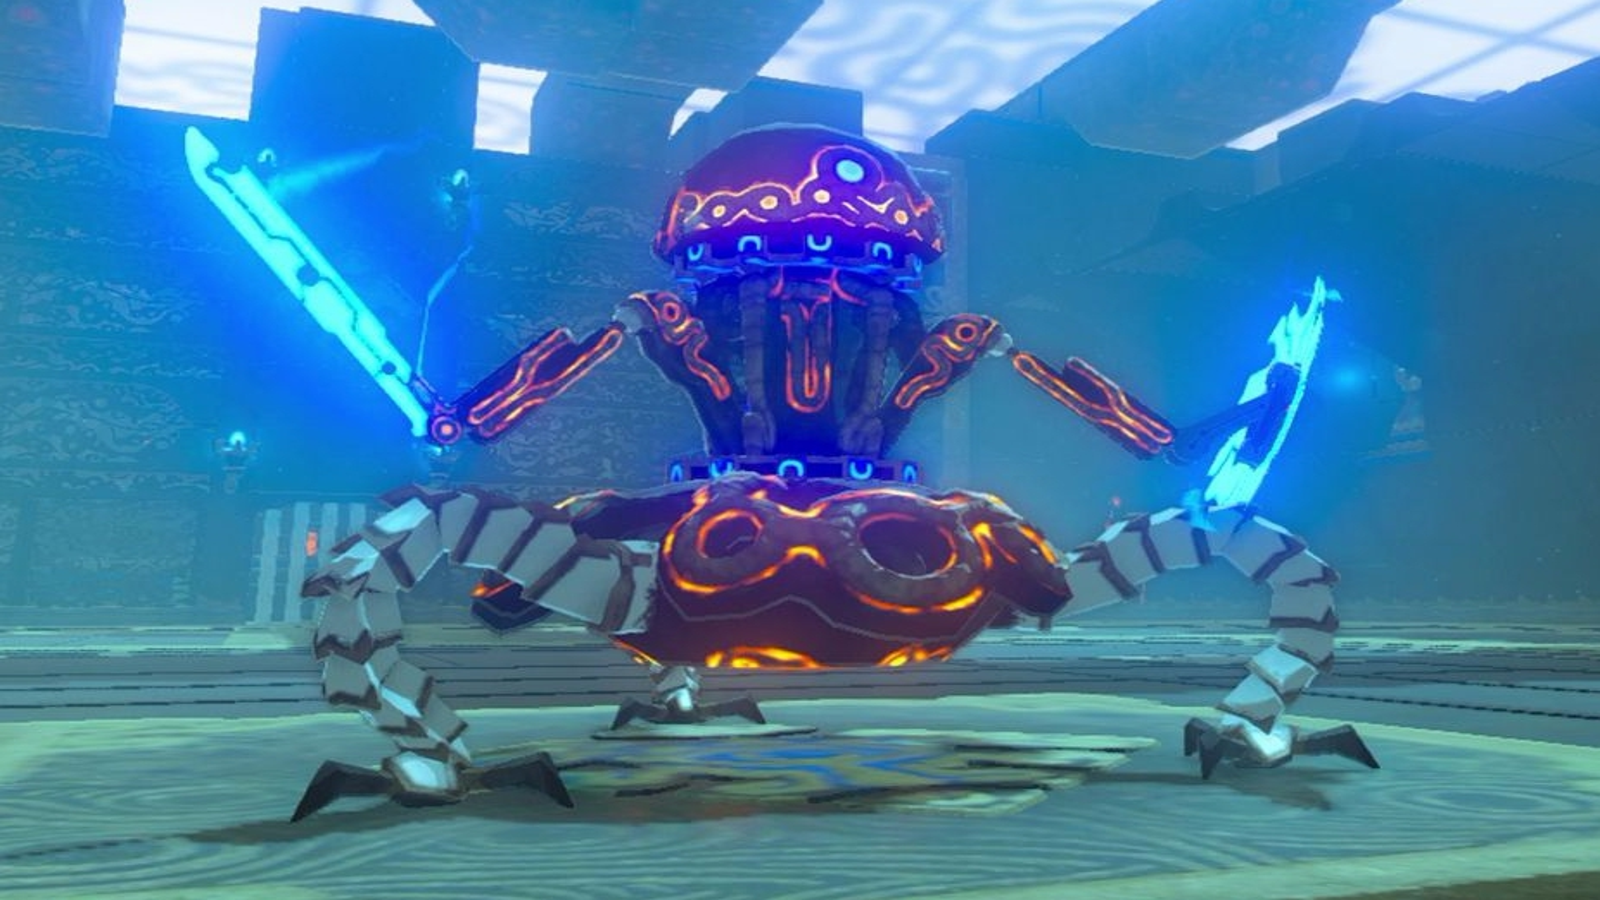 You Can Still Participate in the Zelda: Breath of the Wild Test of